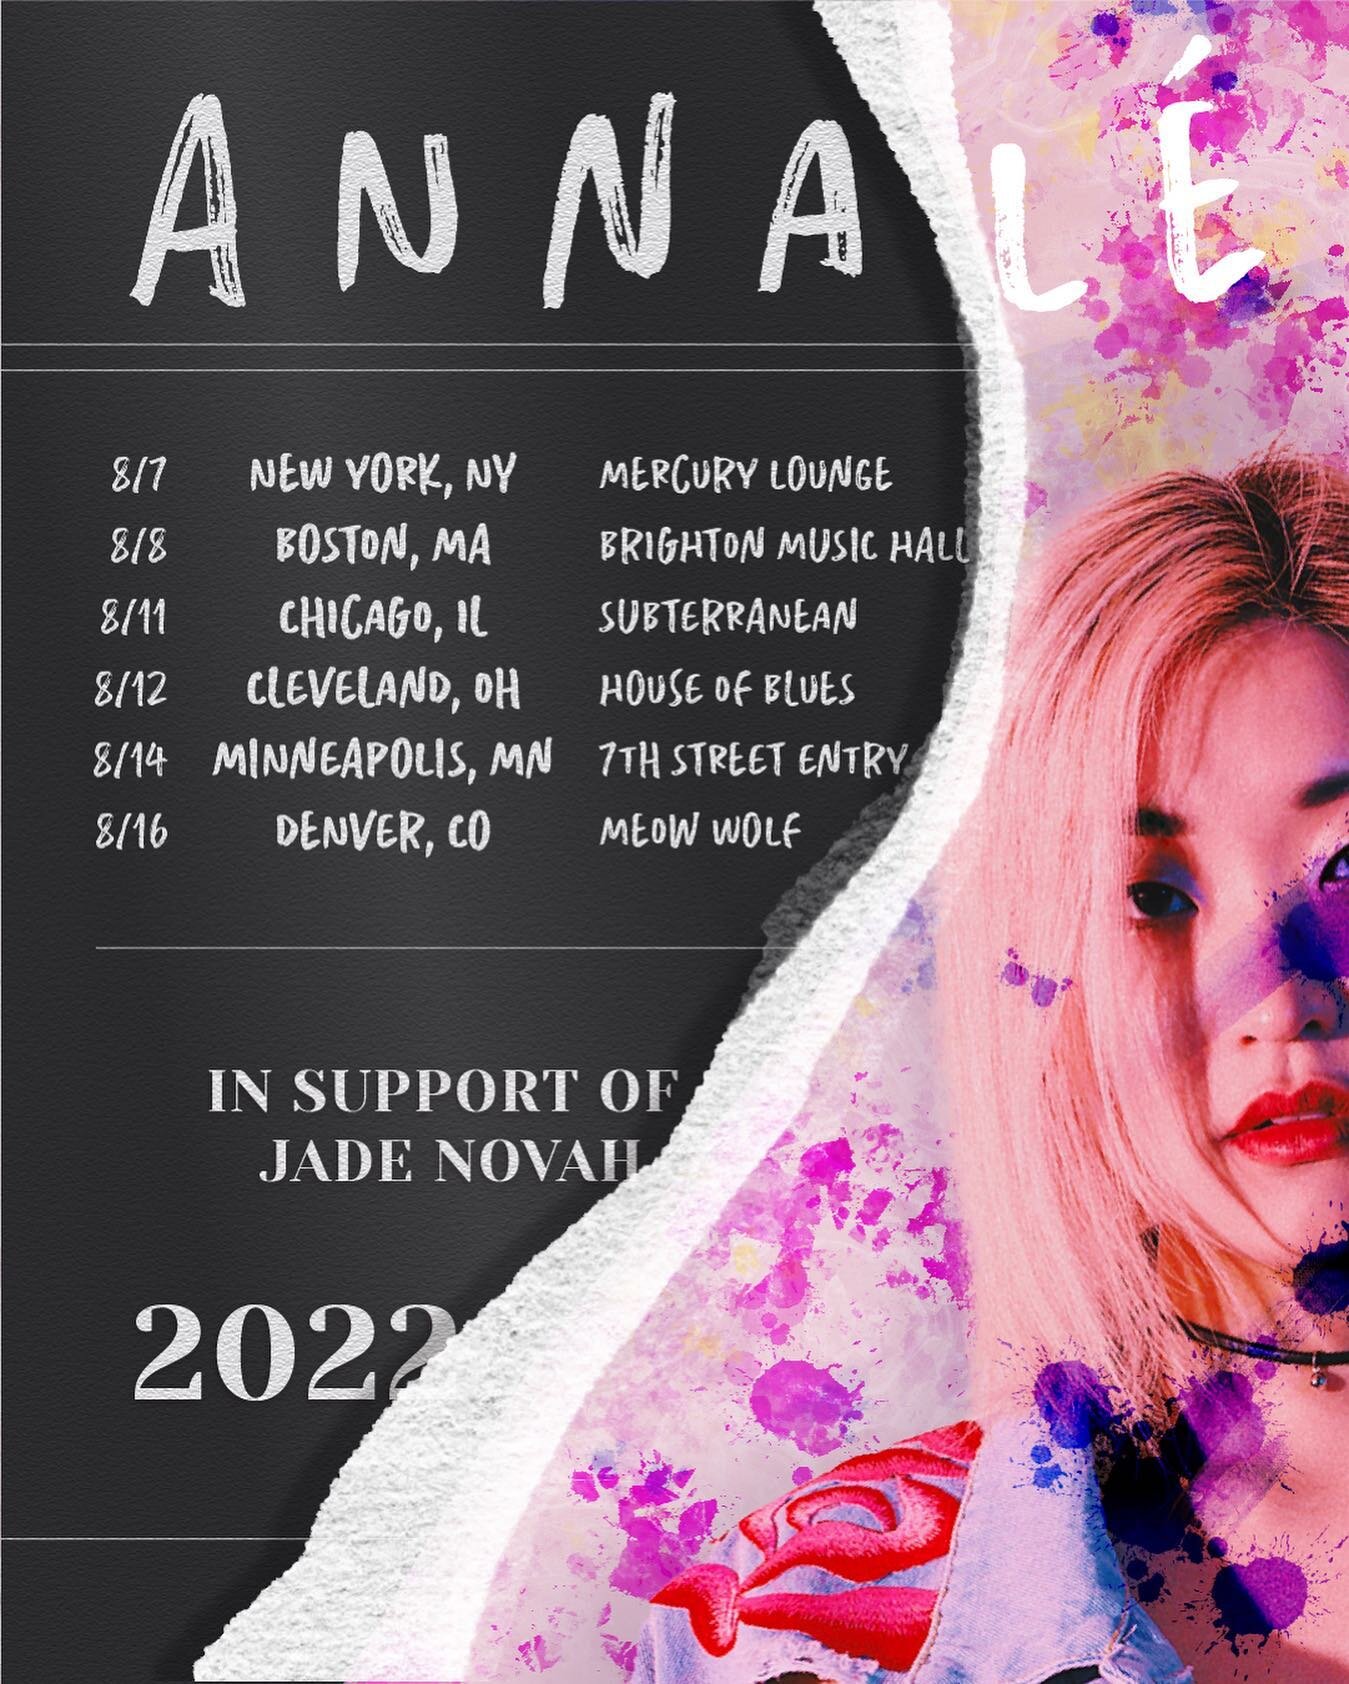 I&rsquo;m going on a 🇺🇸 tour with @jadenovah 😍🔥 Will be hitting six cities ✨ NYC, Boston, Chicago, Cleveland, Minneapolis &amp; Denver 😌 Comment below if you&rsquo;re coming!!! 🥰

Dope poster design by @ordinaryjae 🤍

#livemusic #ontour #tour